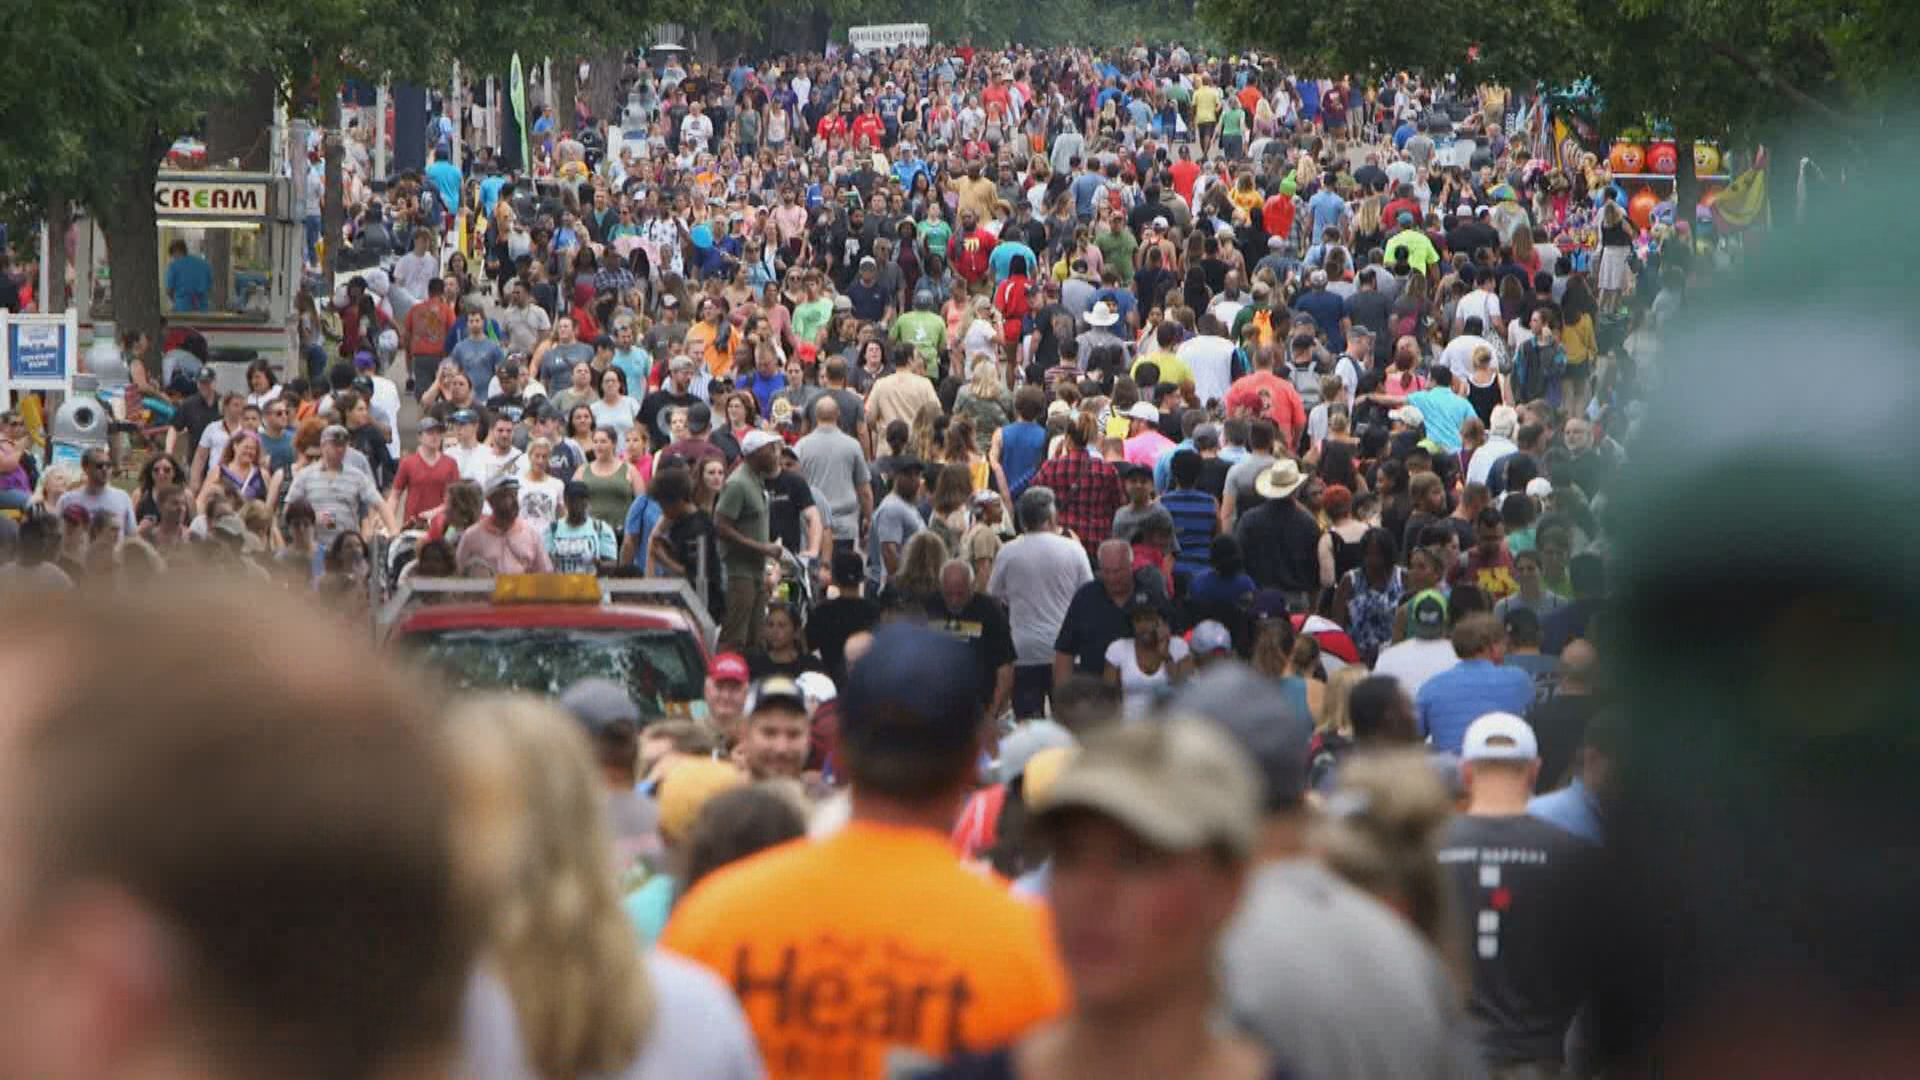 The Minnesota State Fair has a detailed security plan -- and this year, it will boost officers and security cameras